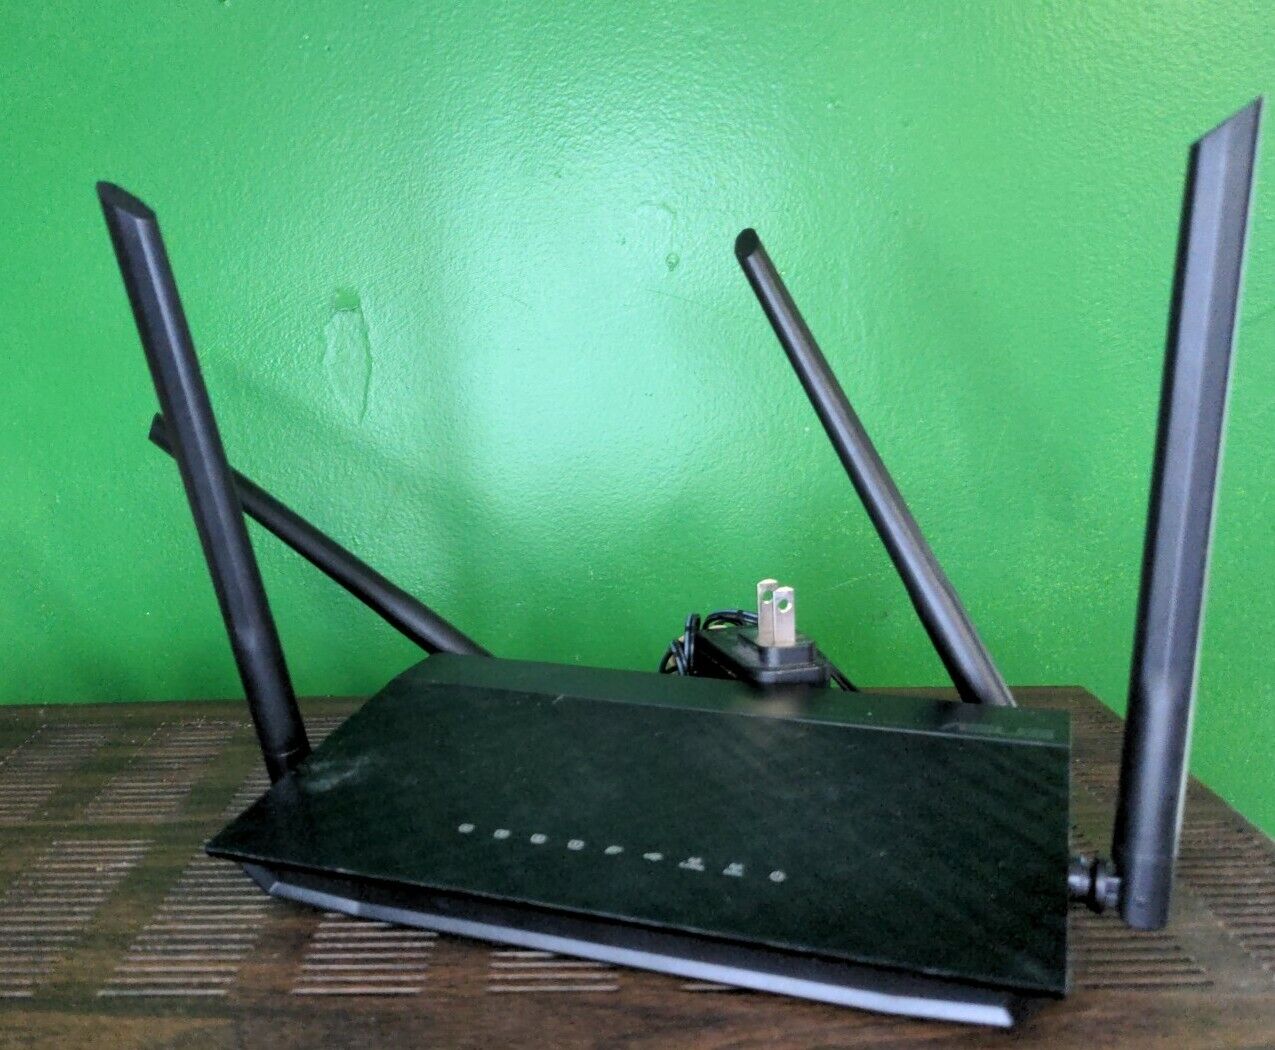 ASUS RT-AC1200 V2 Wireless Dual Band Router r2